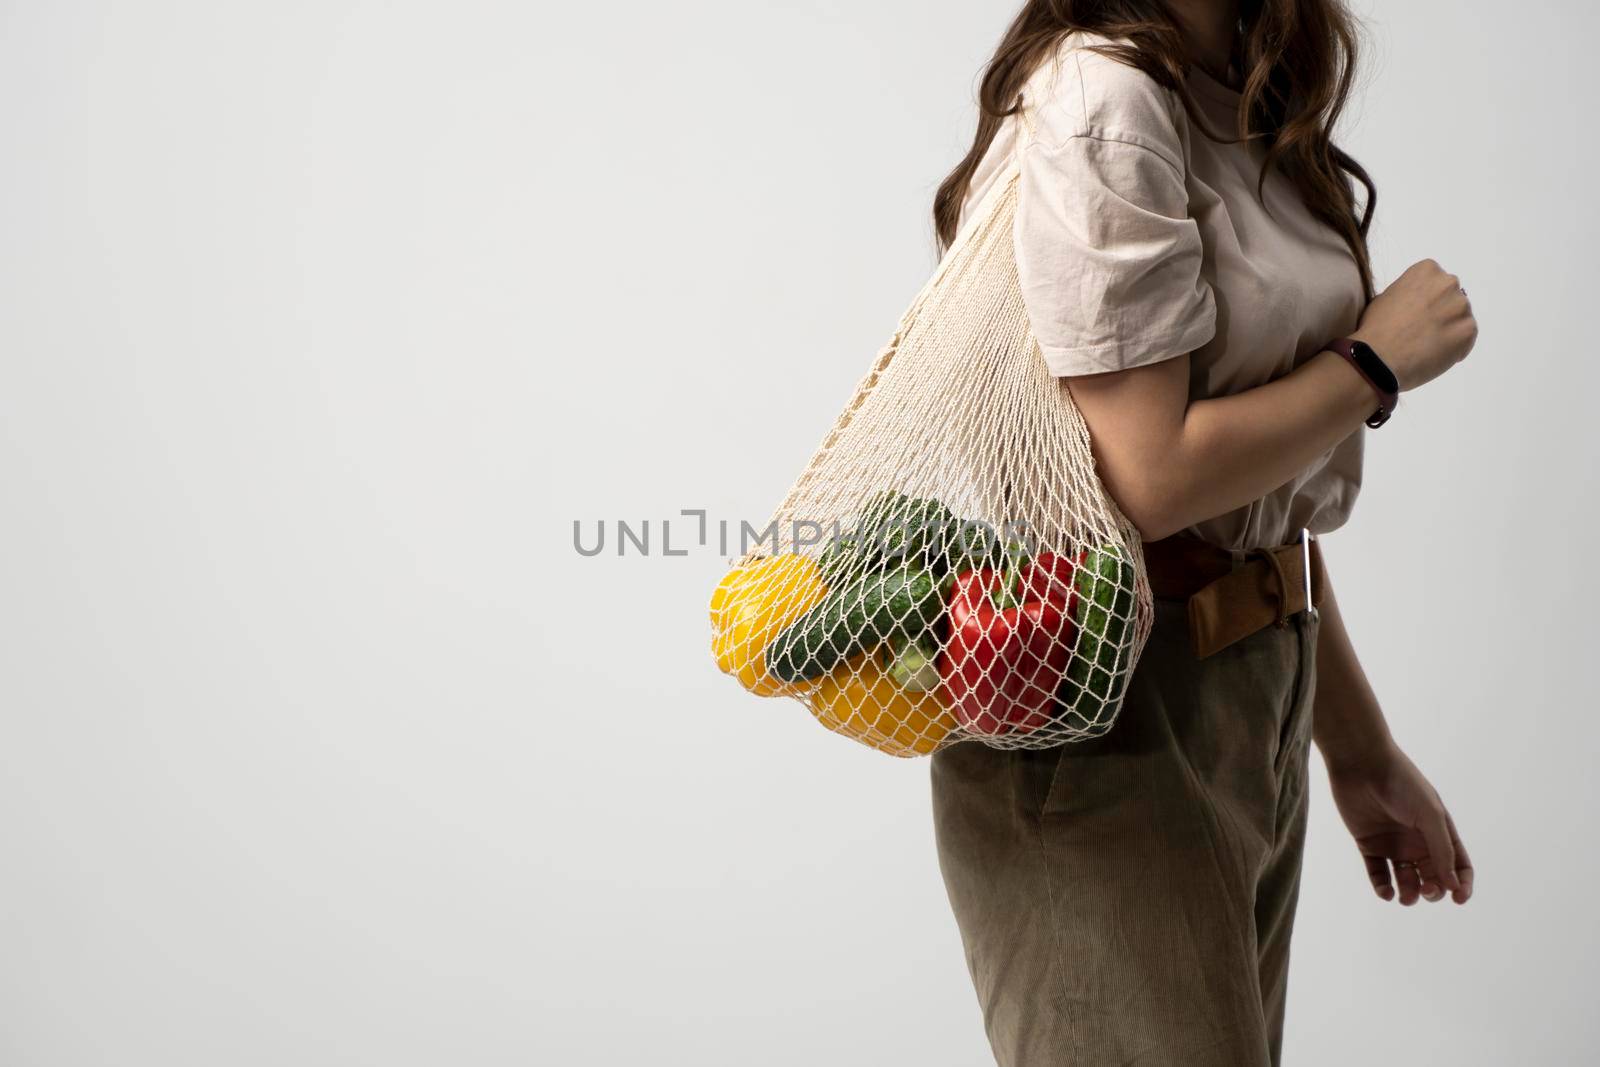 Reusable eco bag for shopping. String shopping bag with fruits and vegetables in the hands of a young woman. Zero waste, plastic free concept. Eco lifestyle. Eco shopping